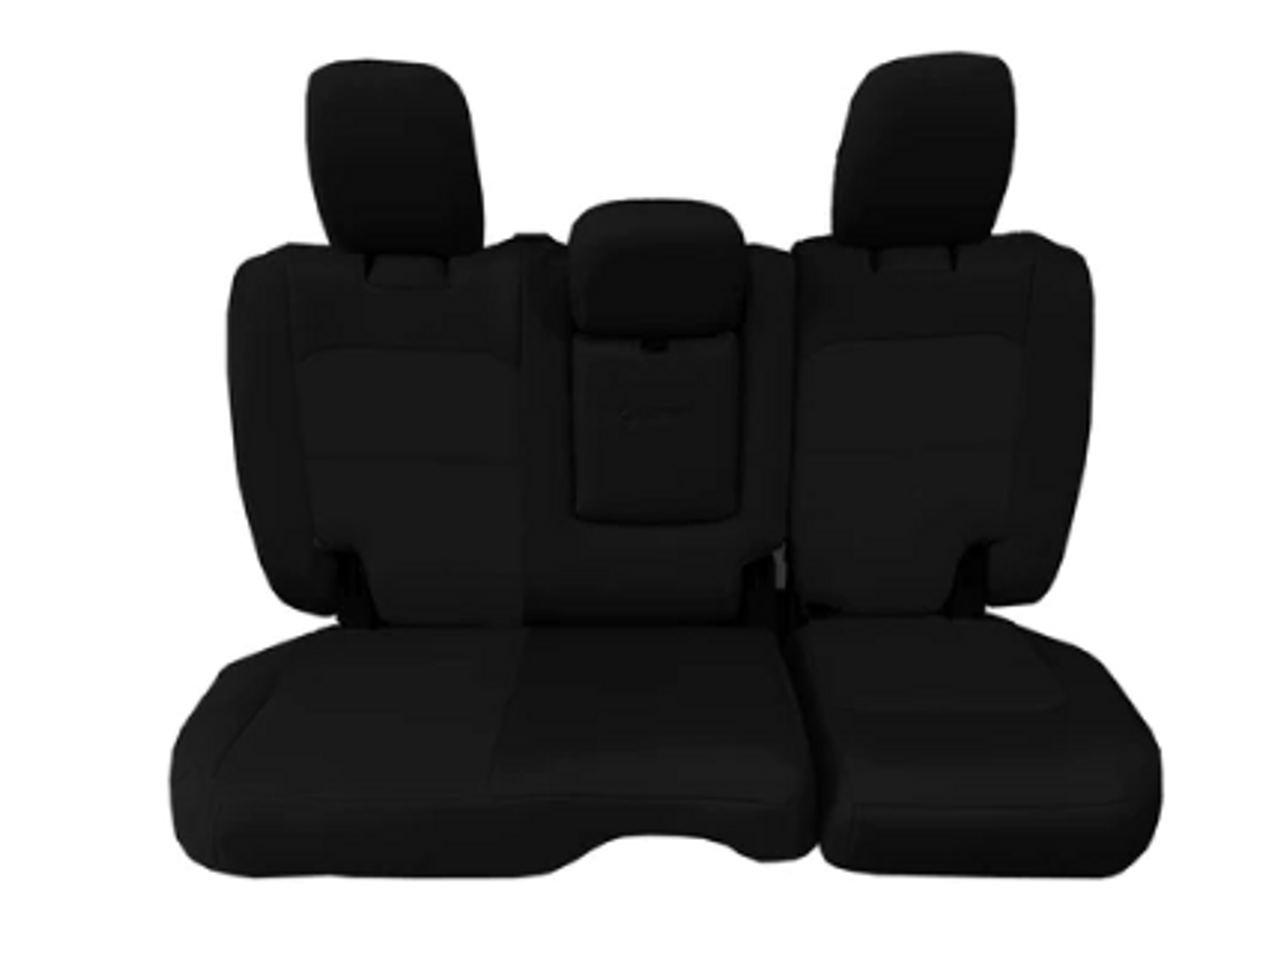 Bartact Tactical Rear Bench Seat Cover for Jeep Wrangler JL 4 Door with Arm Rest 2018+